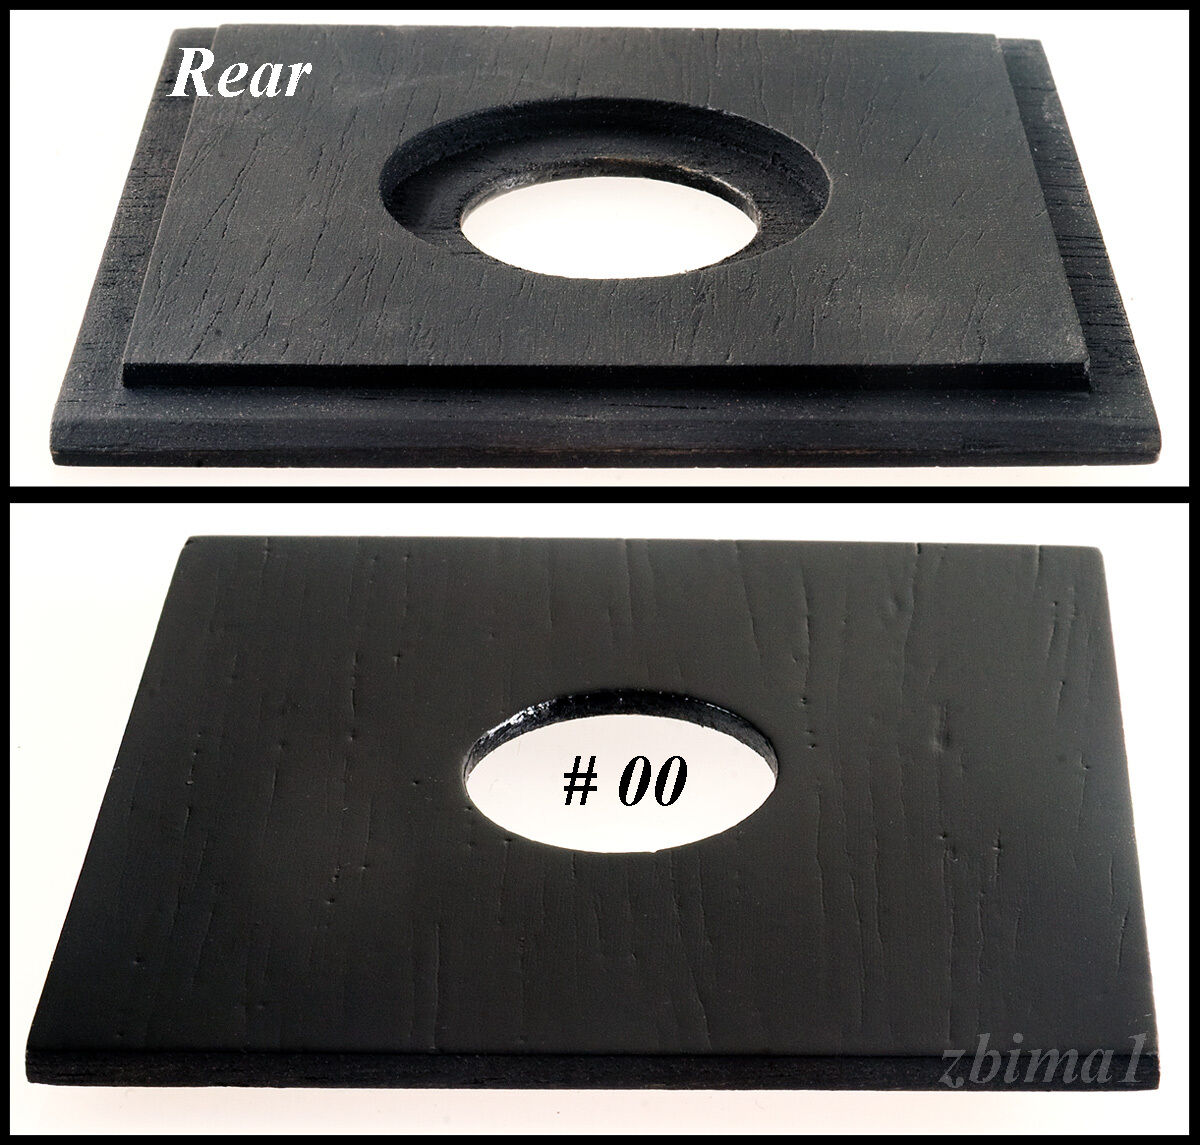 1 Lens Board "a"3-1/4" X 3-1/4" For Graflex  Rb Speed, Or Early 3-1/4" X 5-1/2"